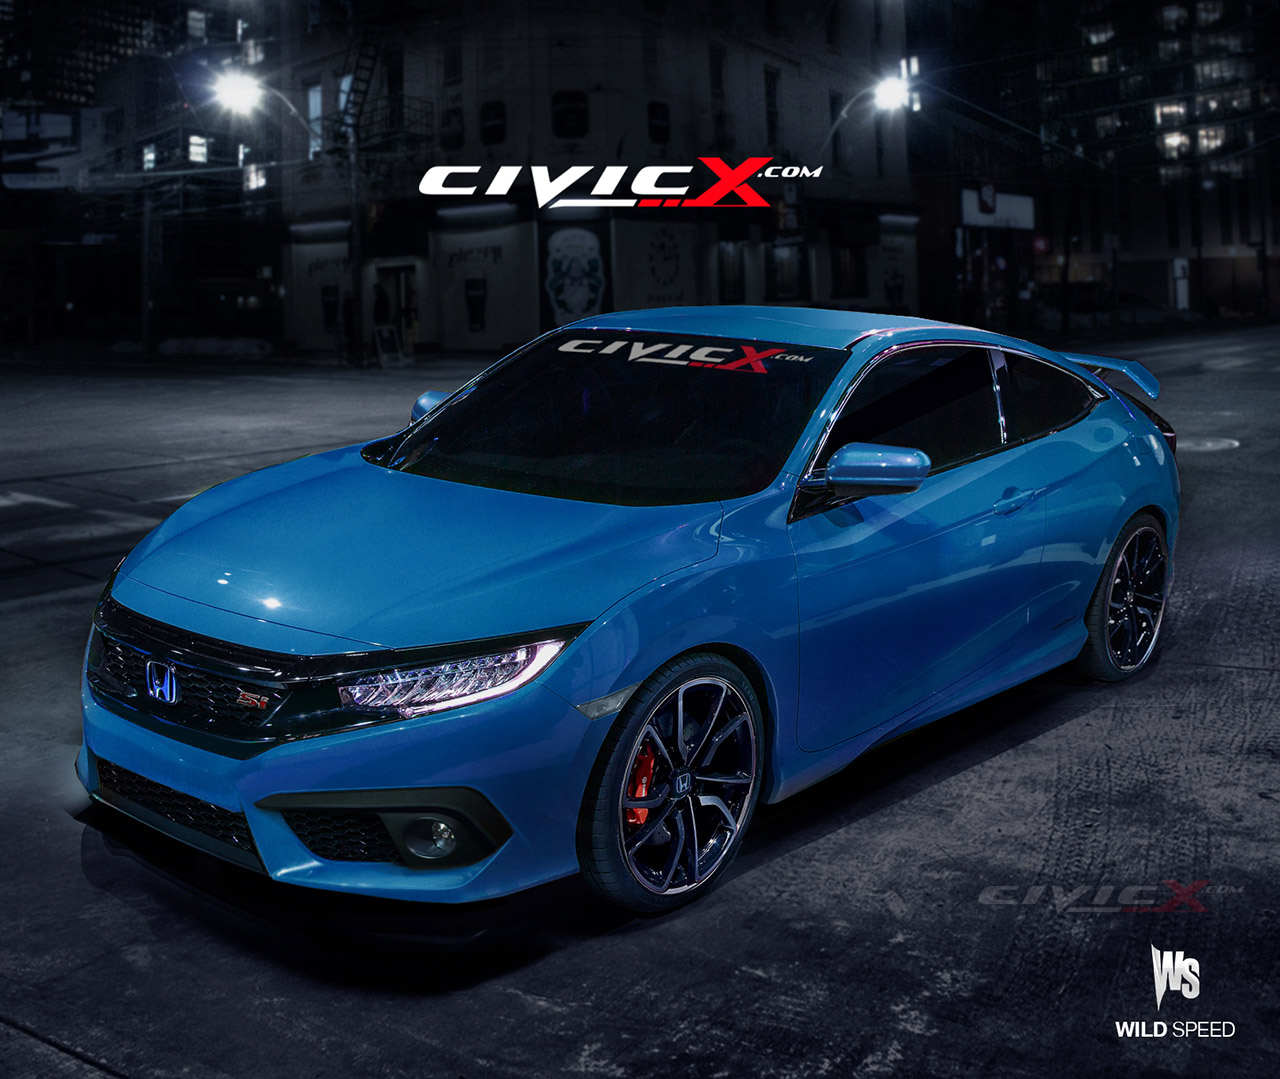 So much has been written about the new 2016 Honda Civic, mostly positive, with its revolutionary design and the first Honda vehicle with a turbocharged gasoline engine.